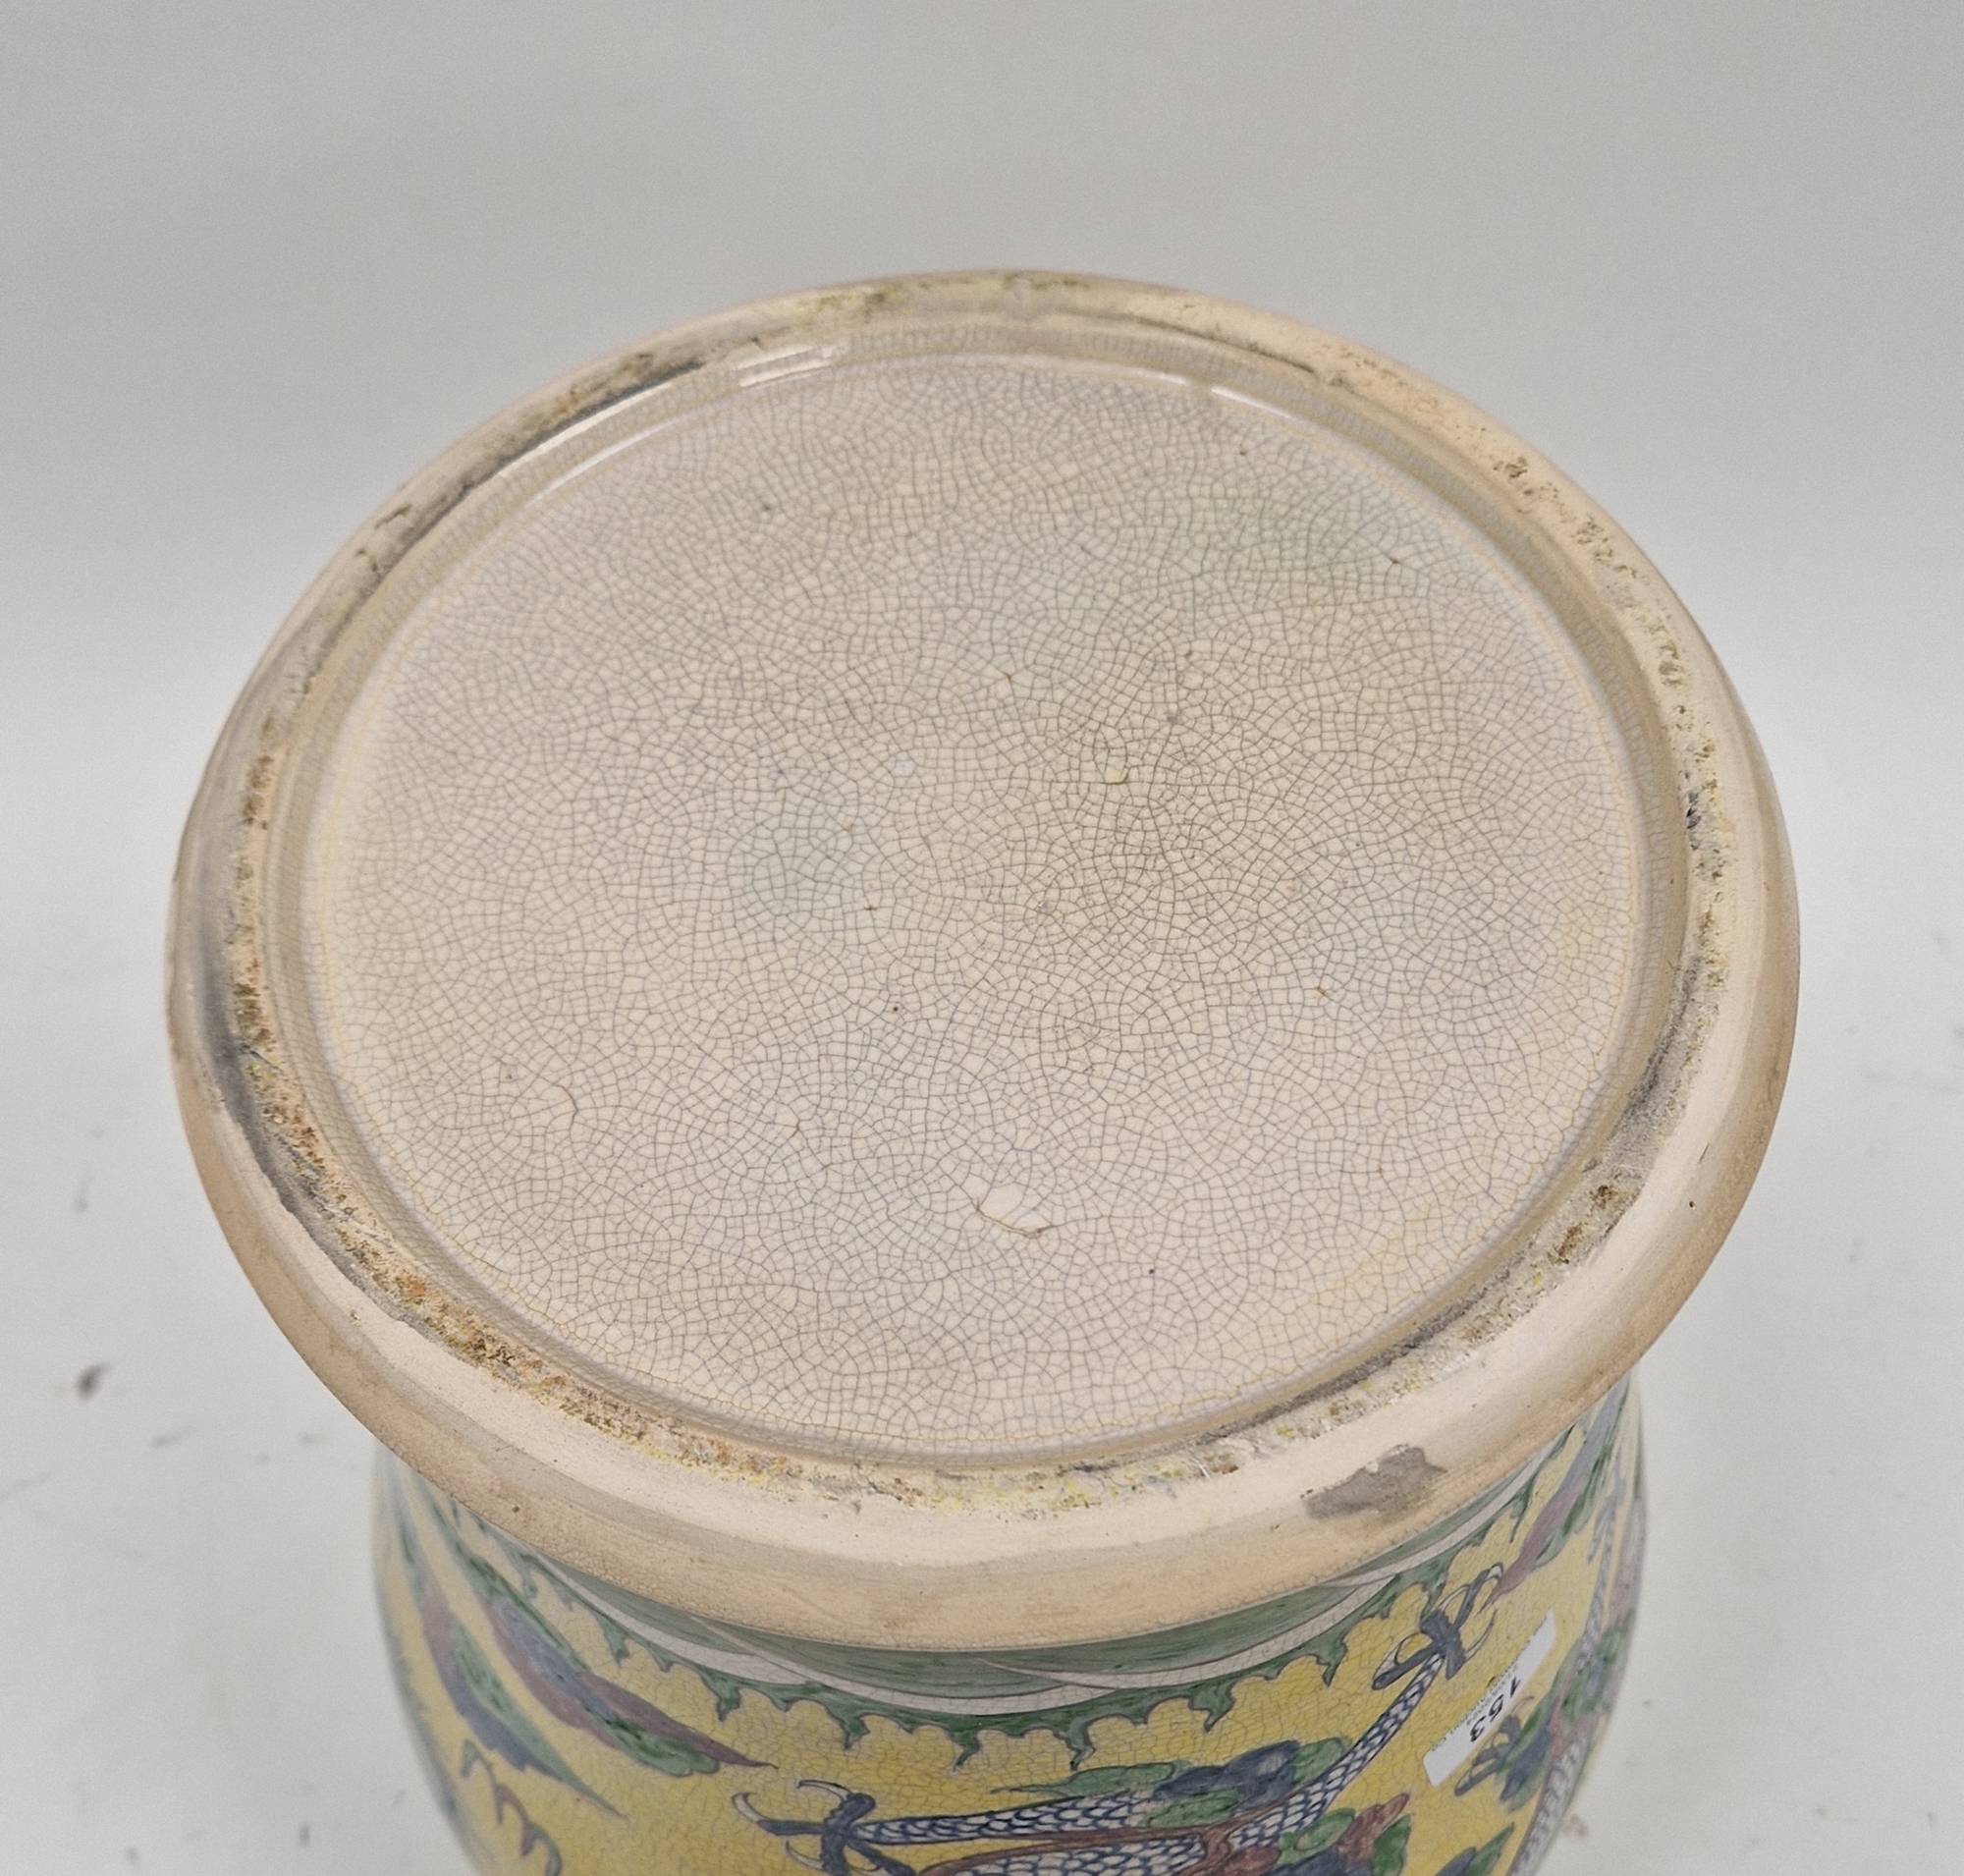 Contemporary Chinese-style baluster yellow ground jar and cover, decorated with a scrolling dragon - Image 2 of 2